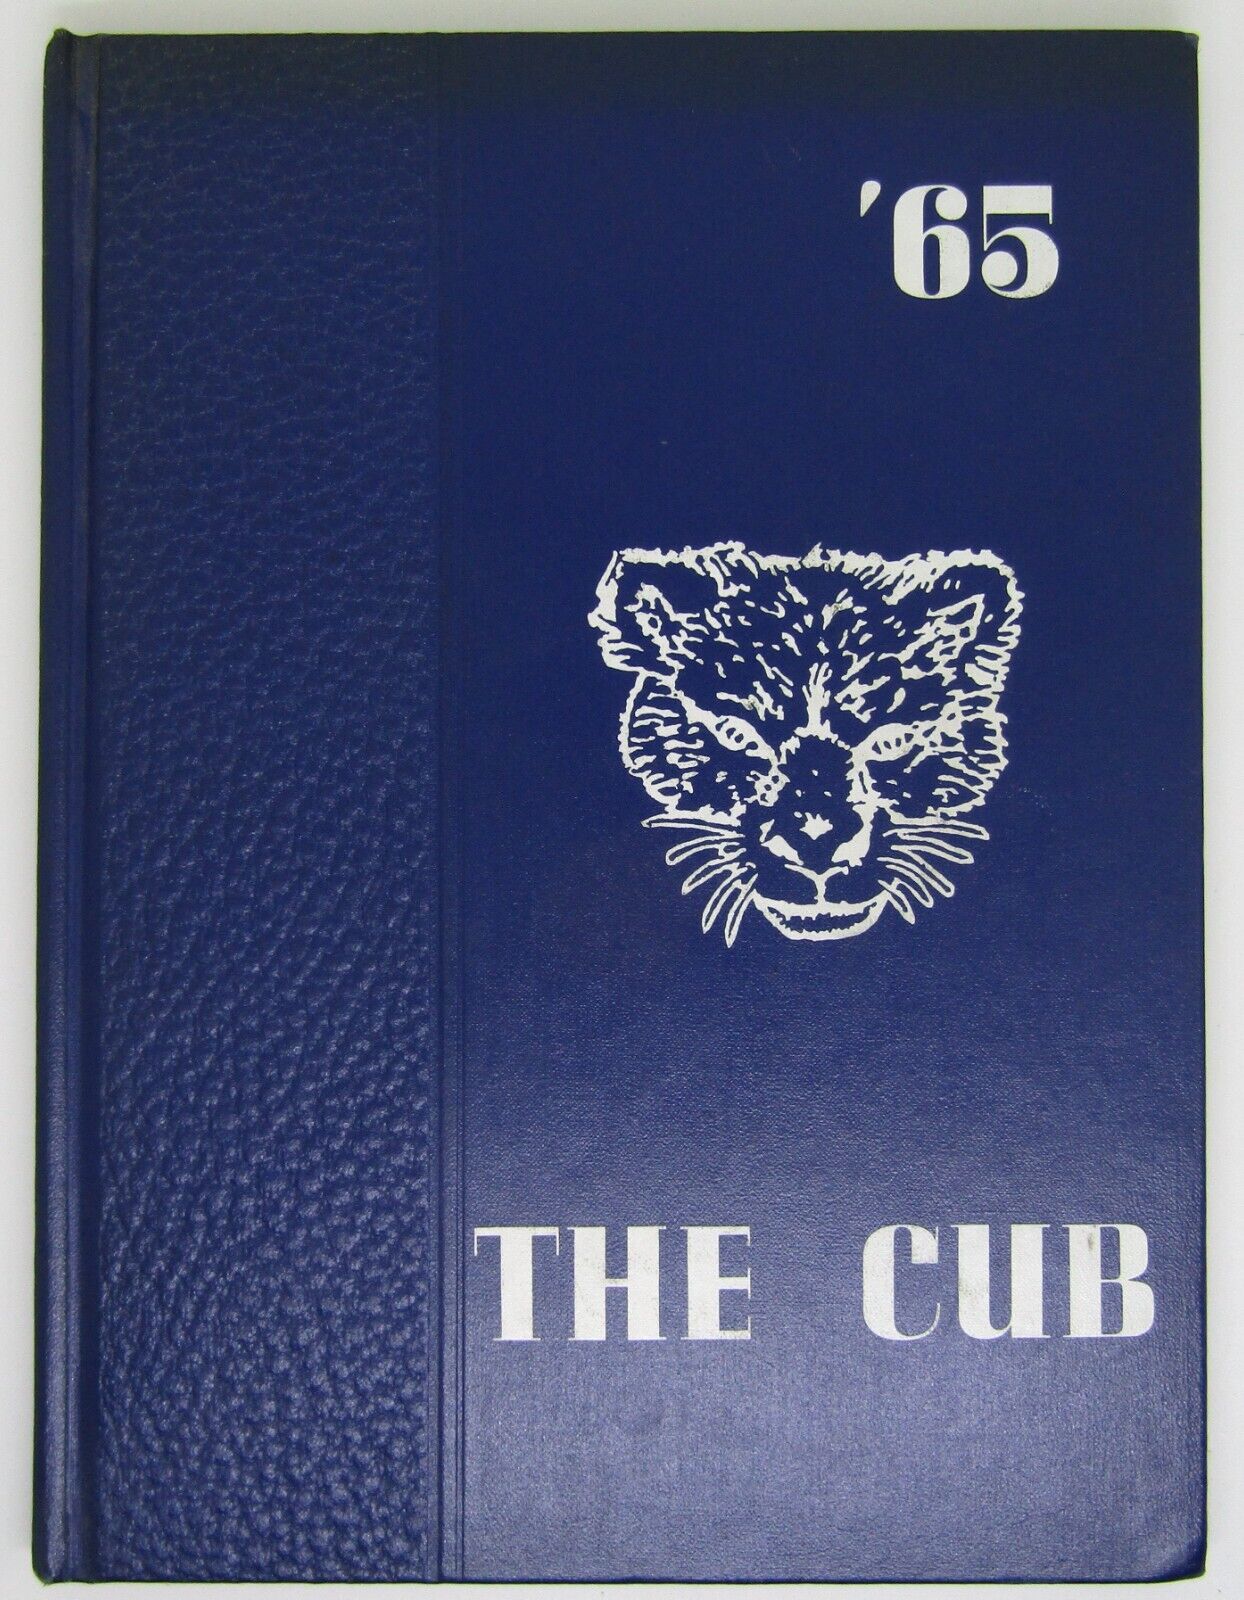 1965 Redbank Junior High School Chattanooga Tennessee The Cub Yearbook